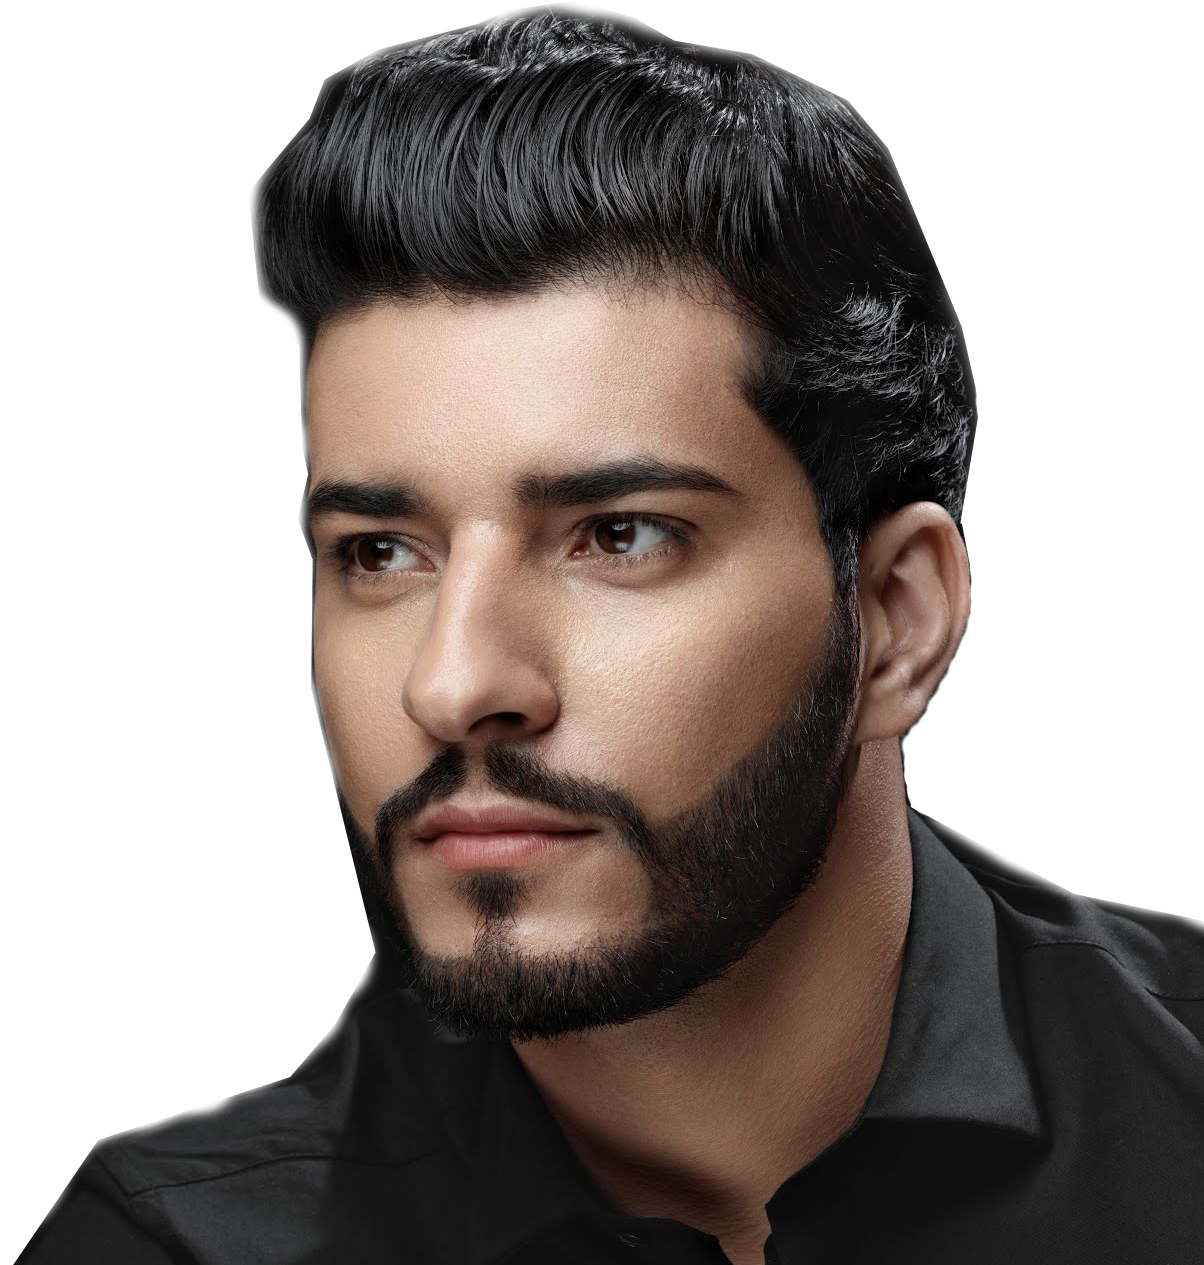 https://www.superhairpieces.com/product_images/uploaded_images/shutterstock-1168819837-no-back.jpg